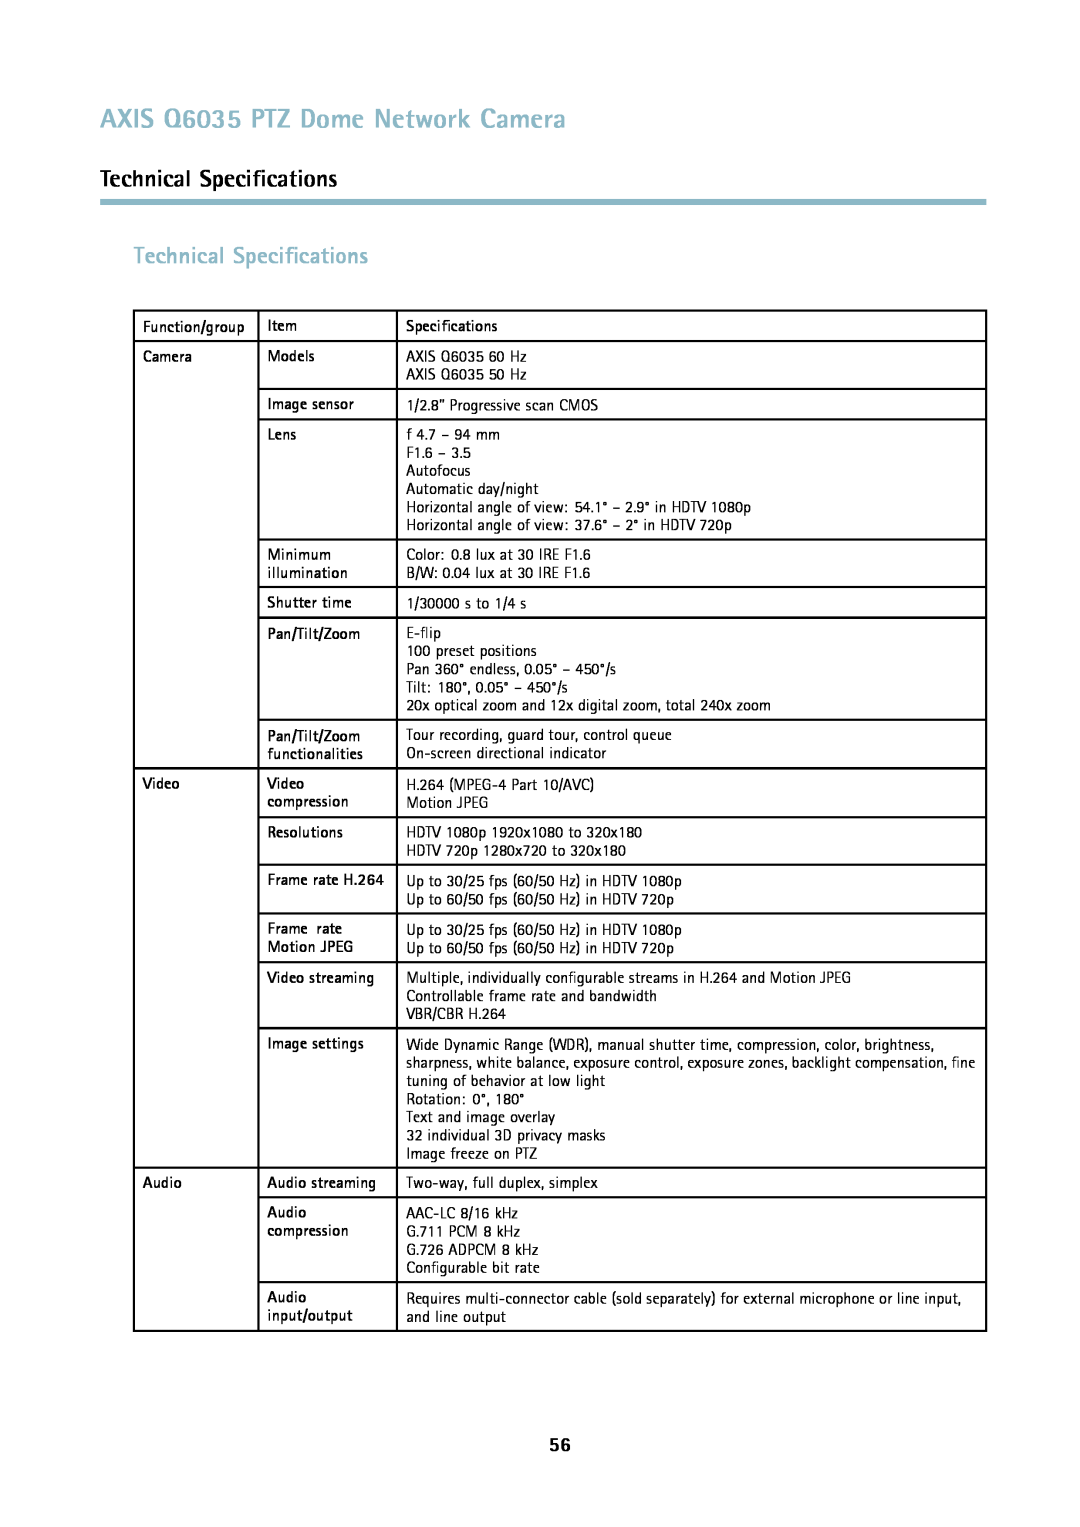 Axis Communications axis communications dome network camera Technical Speciﬁcations, Function/group, Camera, Models, Lens 